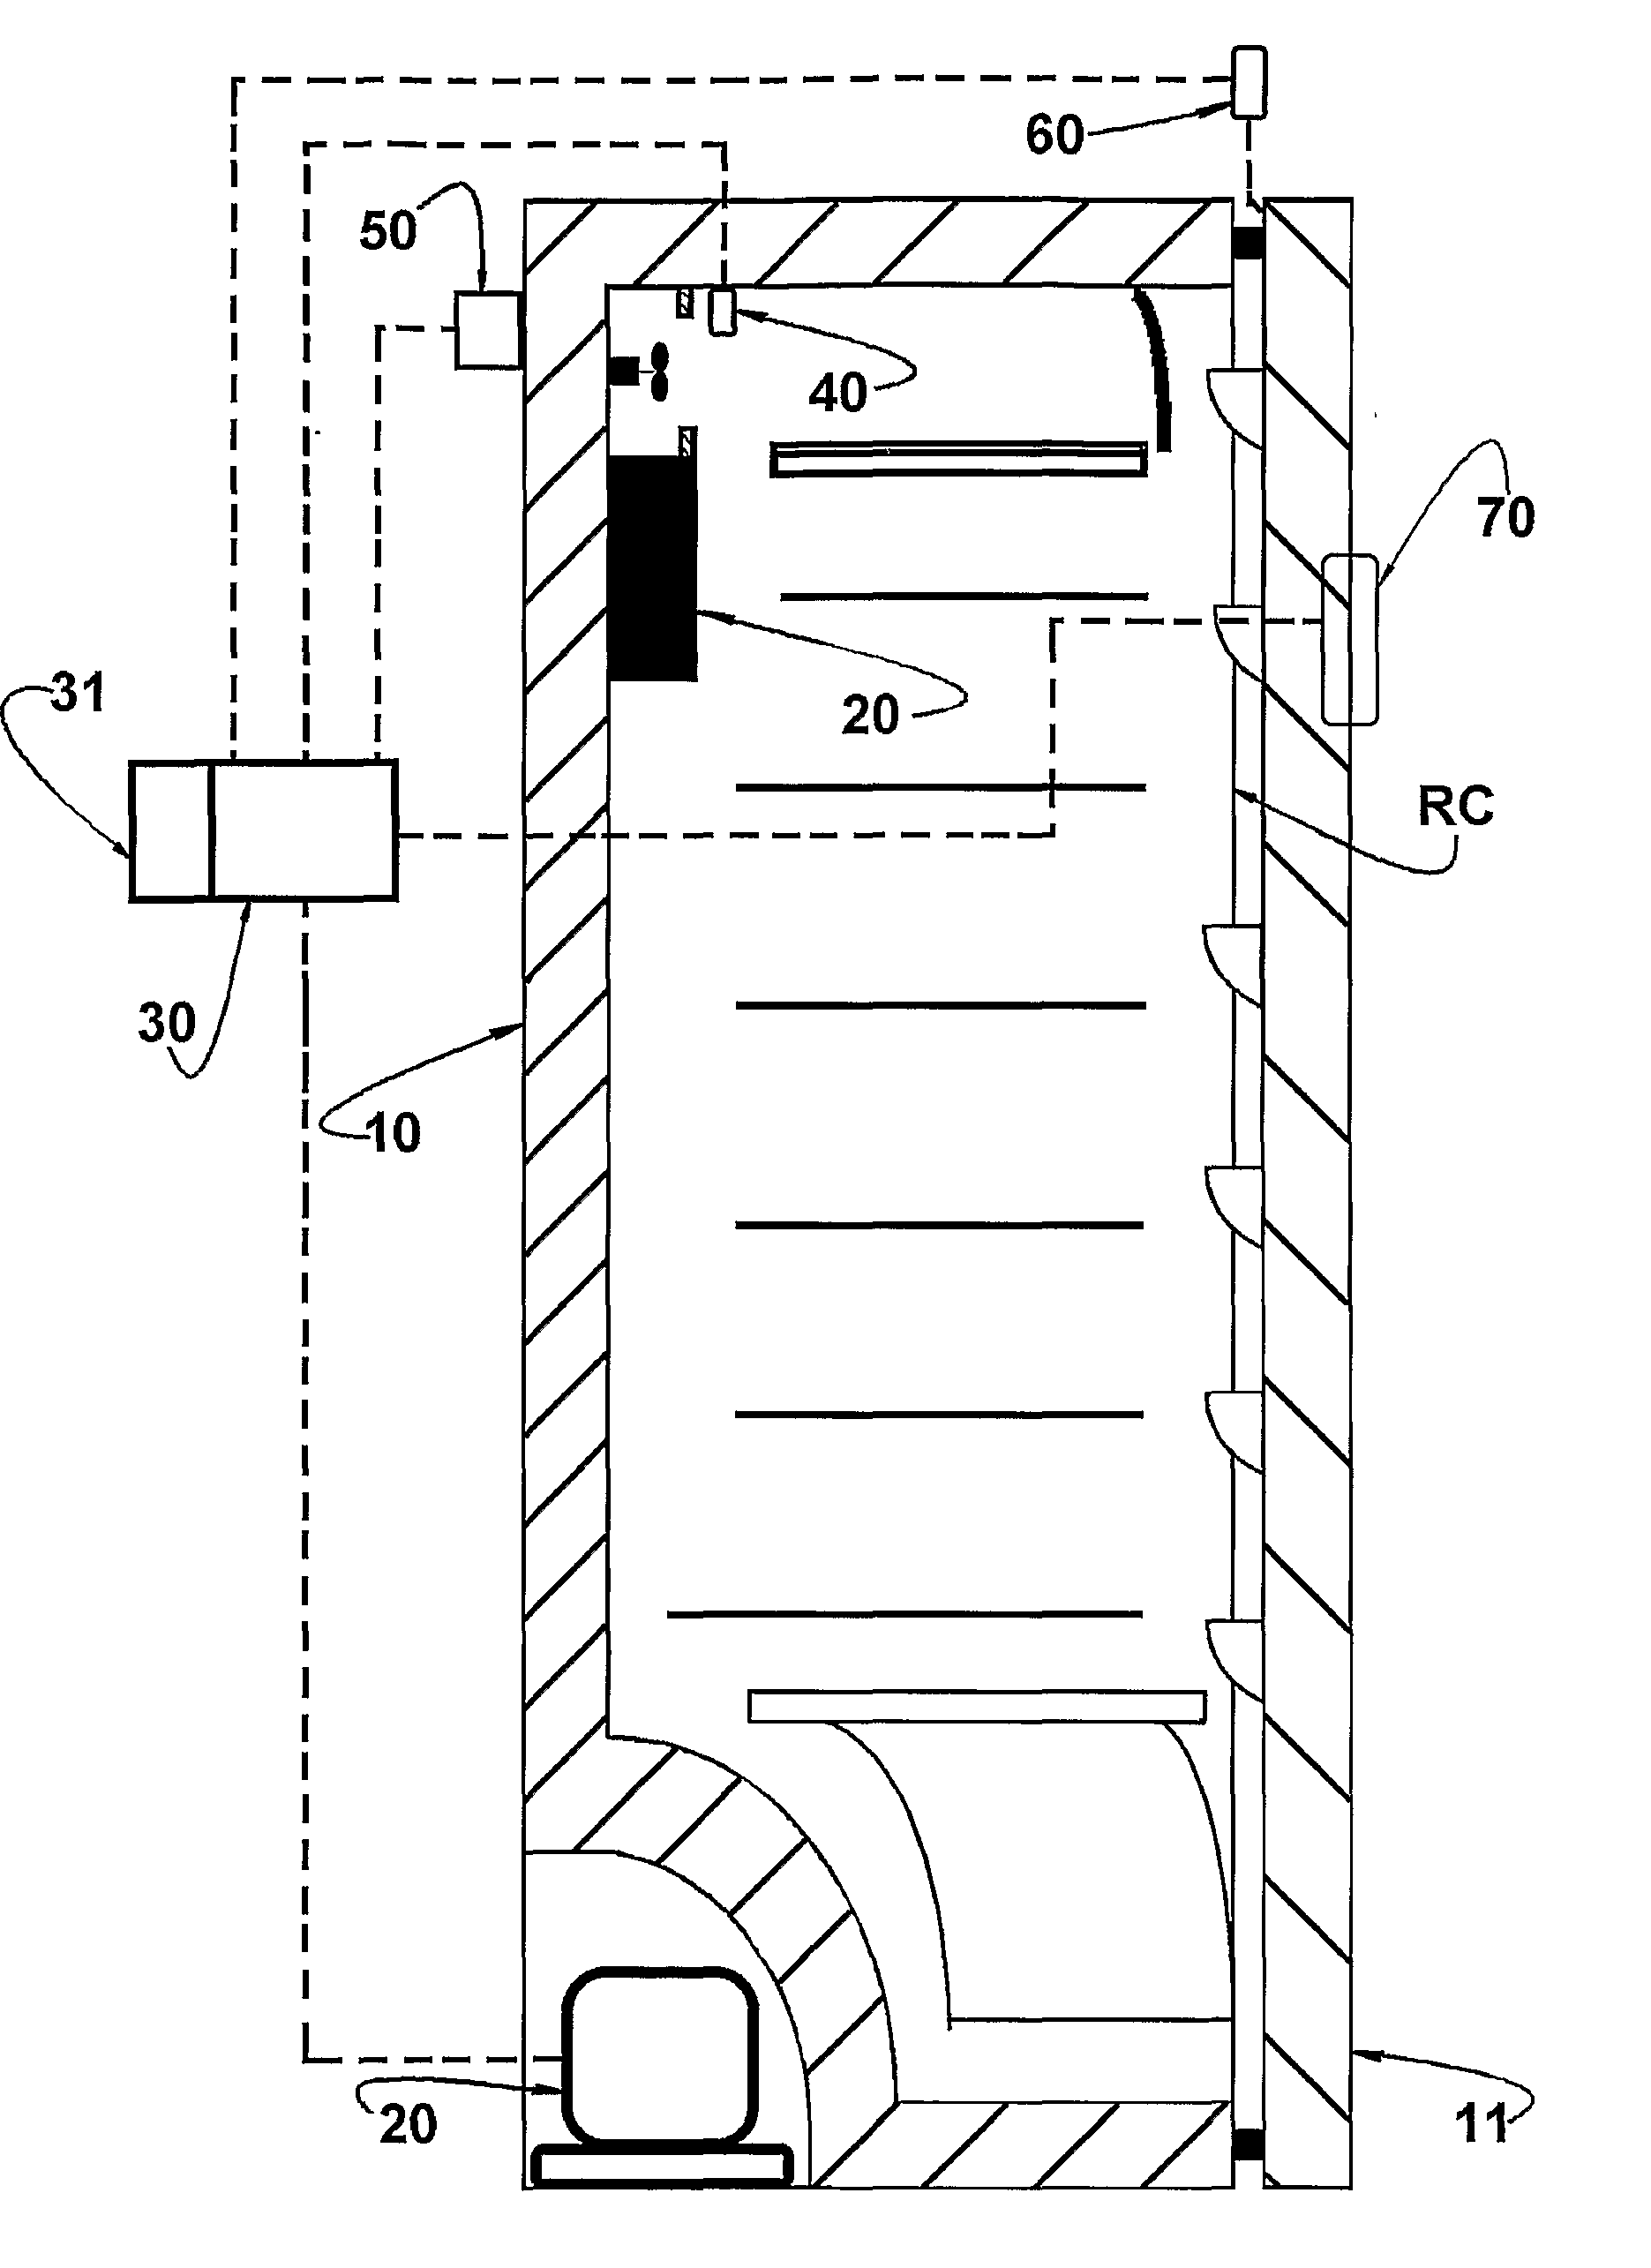 Temperature Control System In A Refrigeration Appliance